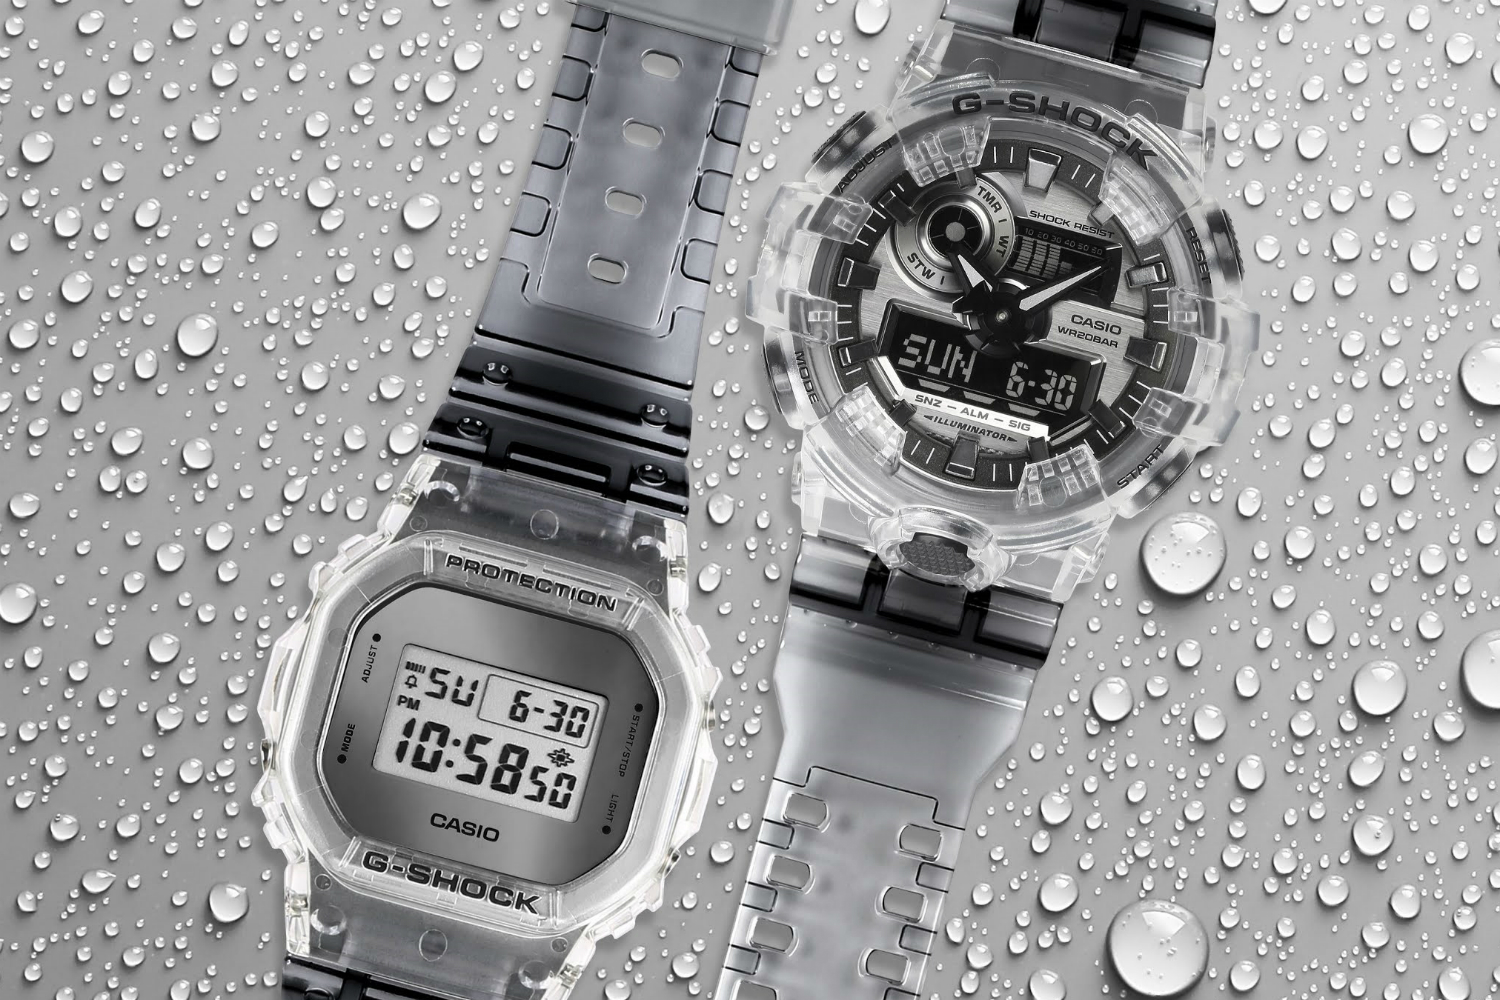 Relive the '90s with the Translucent G-Shock Skeleton Series - The